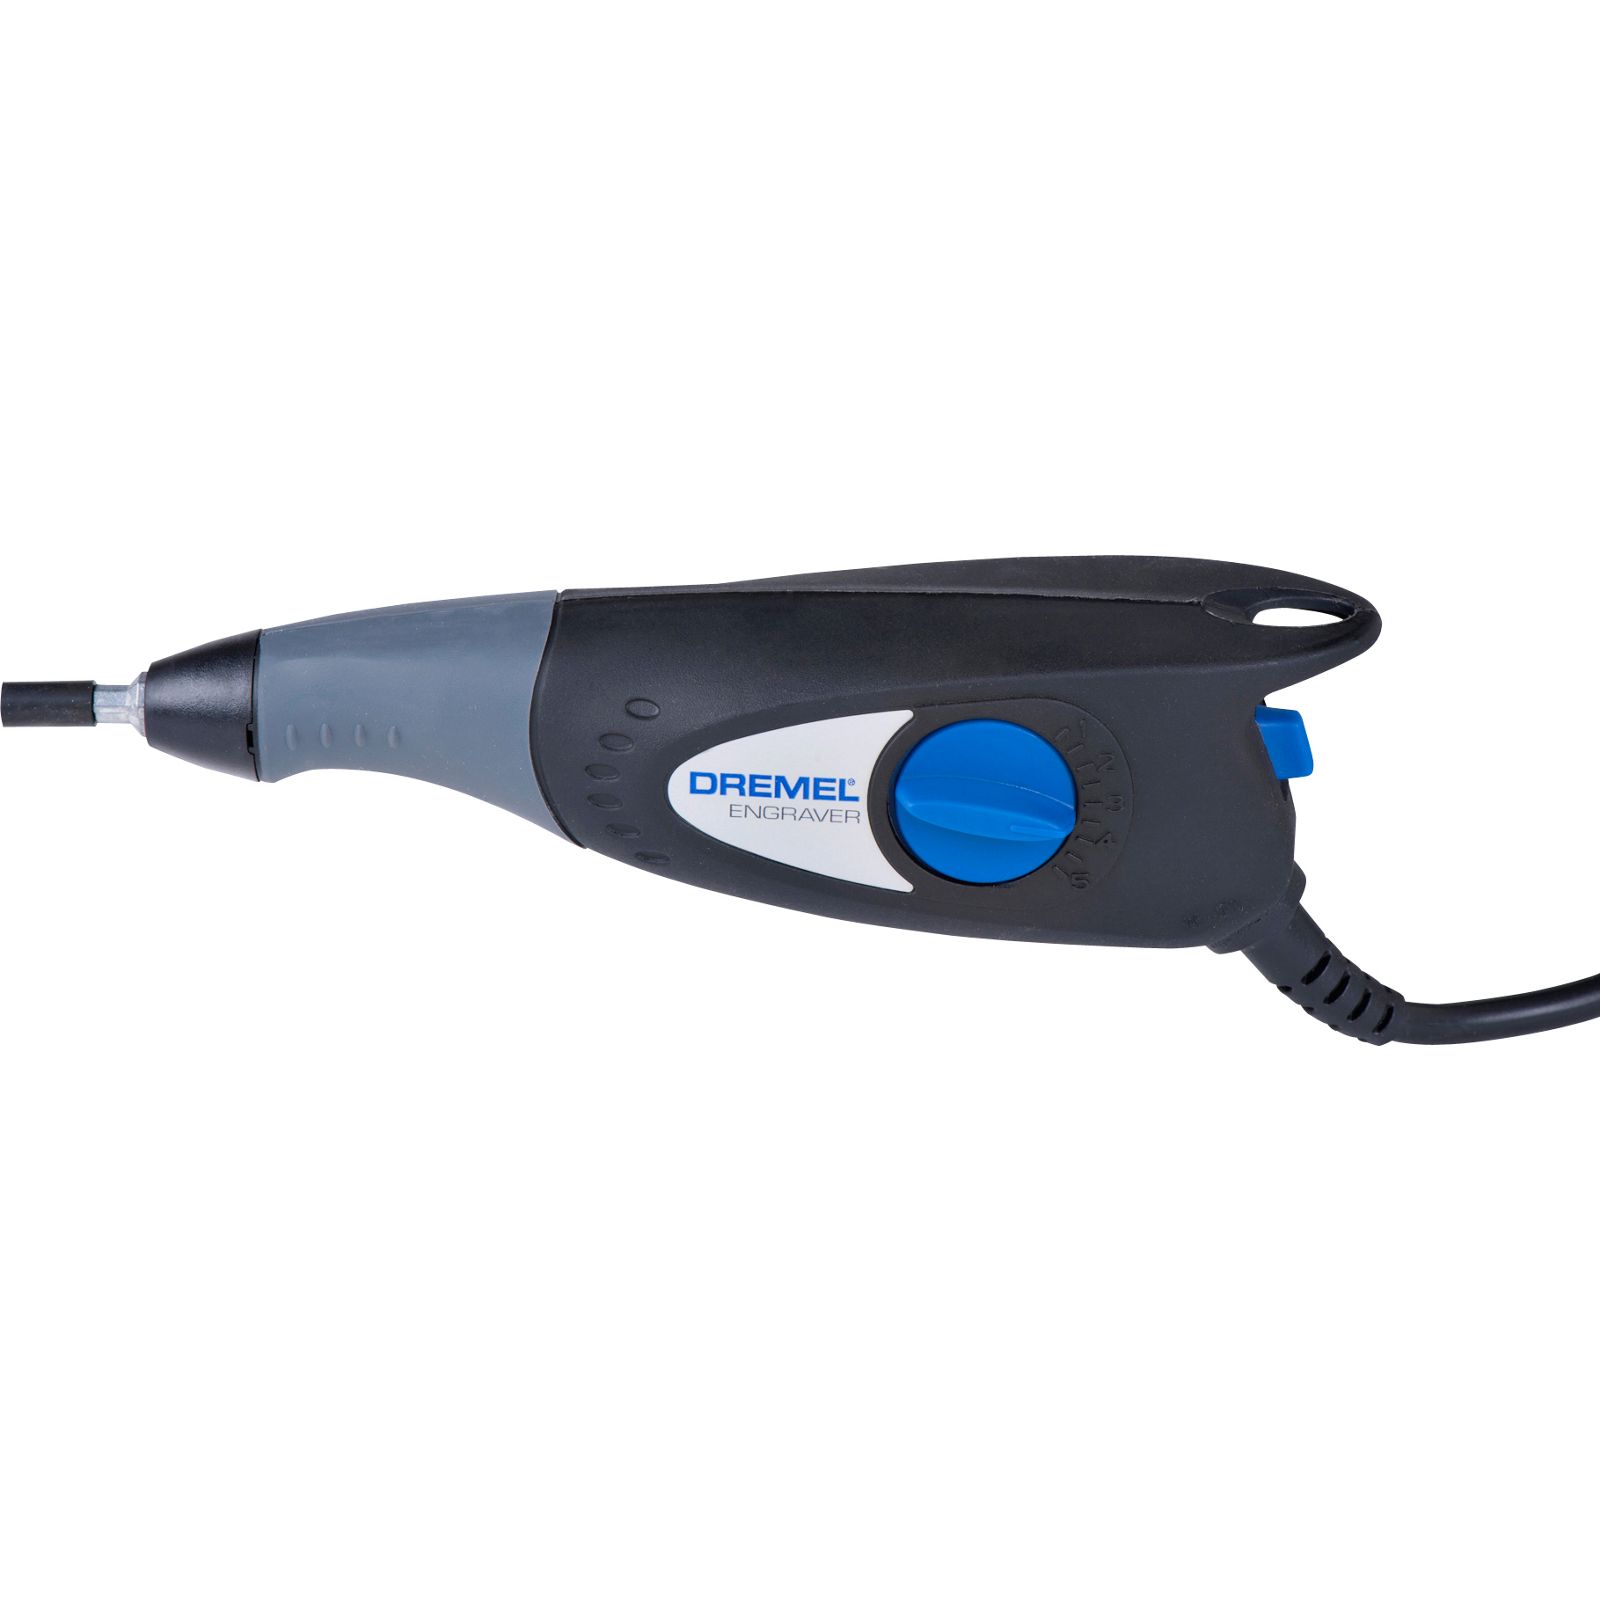 Dremel Engraver (290-1) for Metal, Glass, Wood 290 Series Corded Rotary Tool